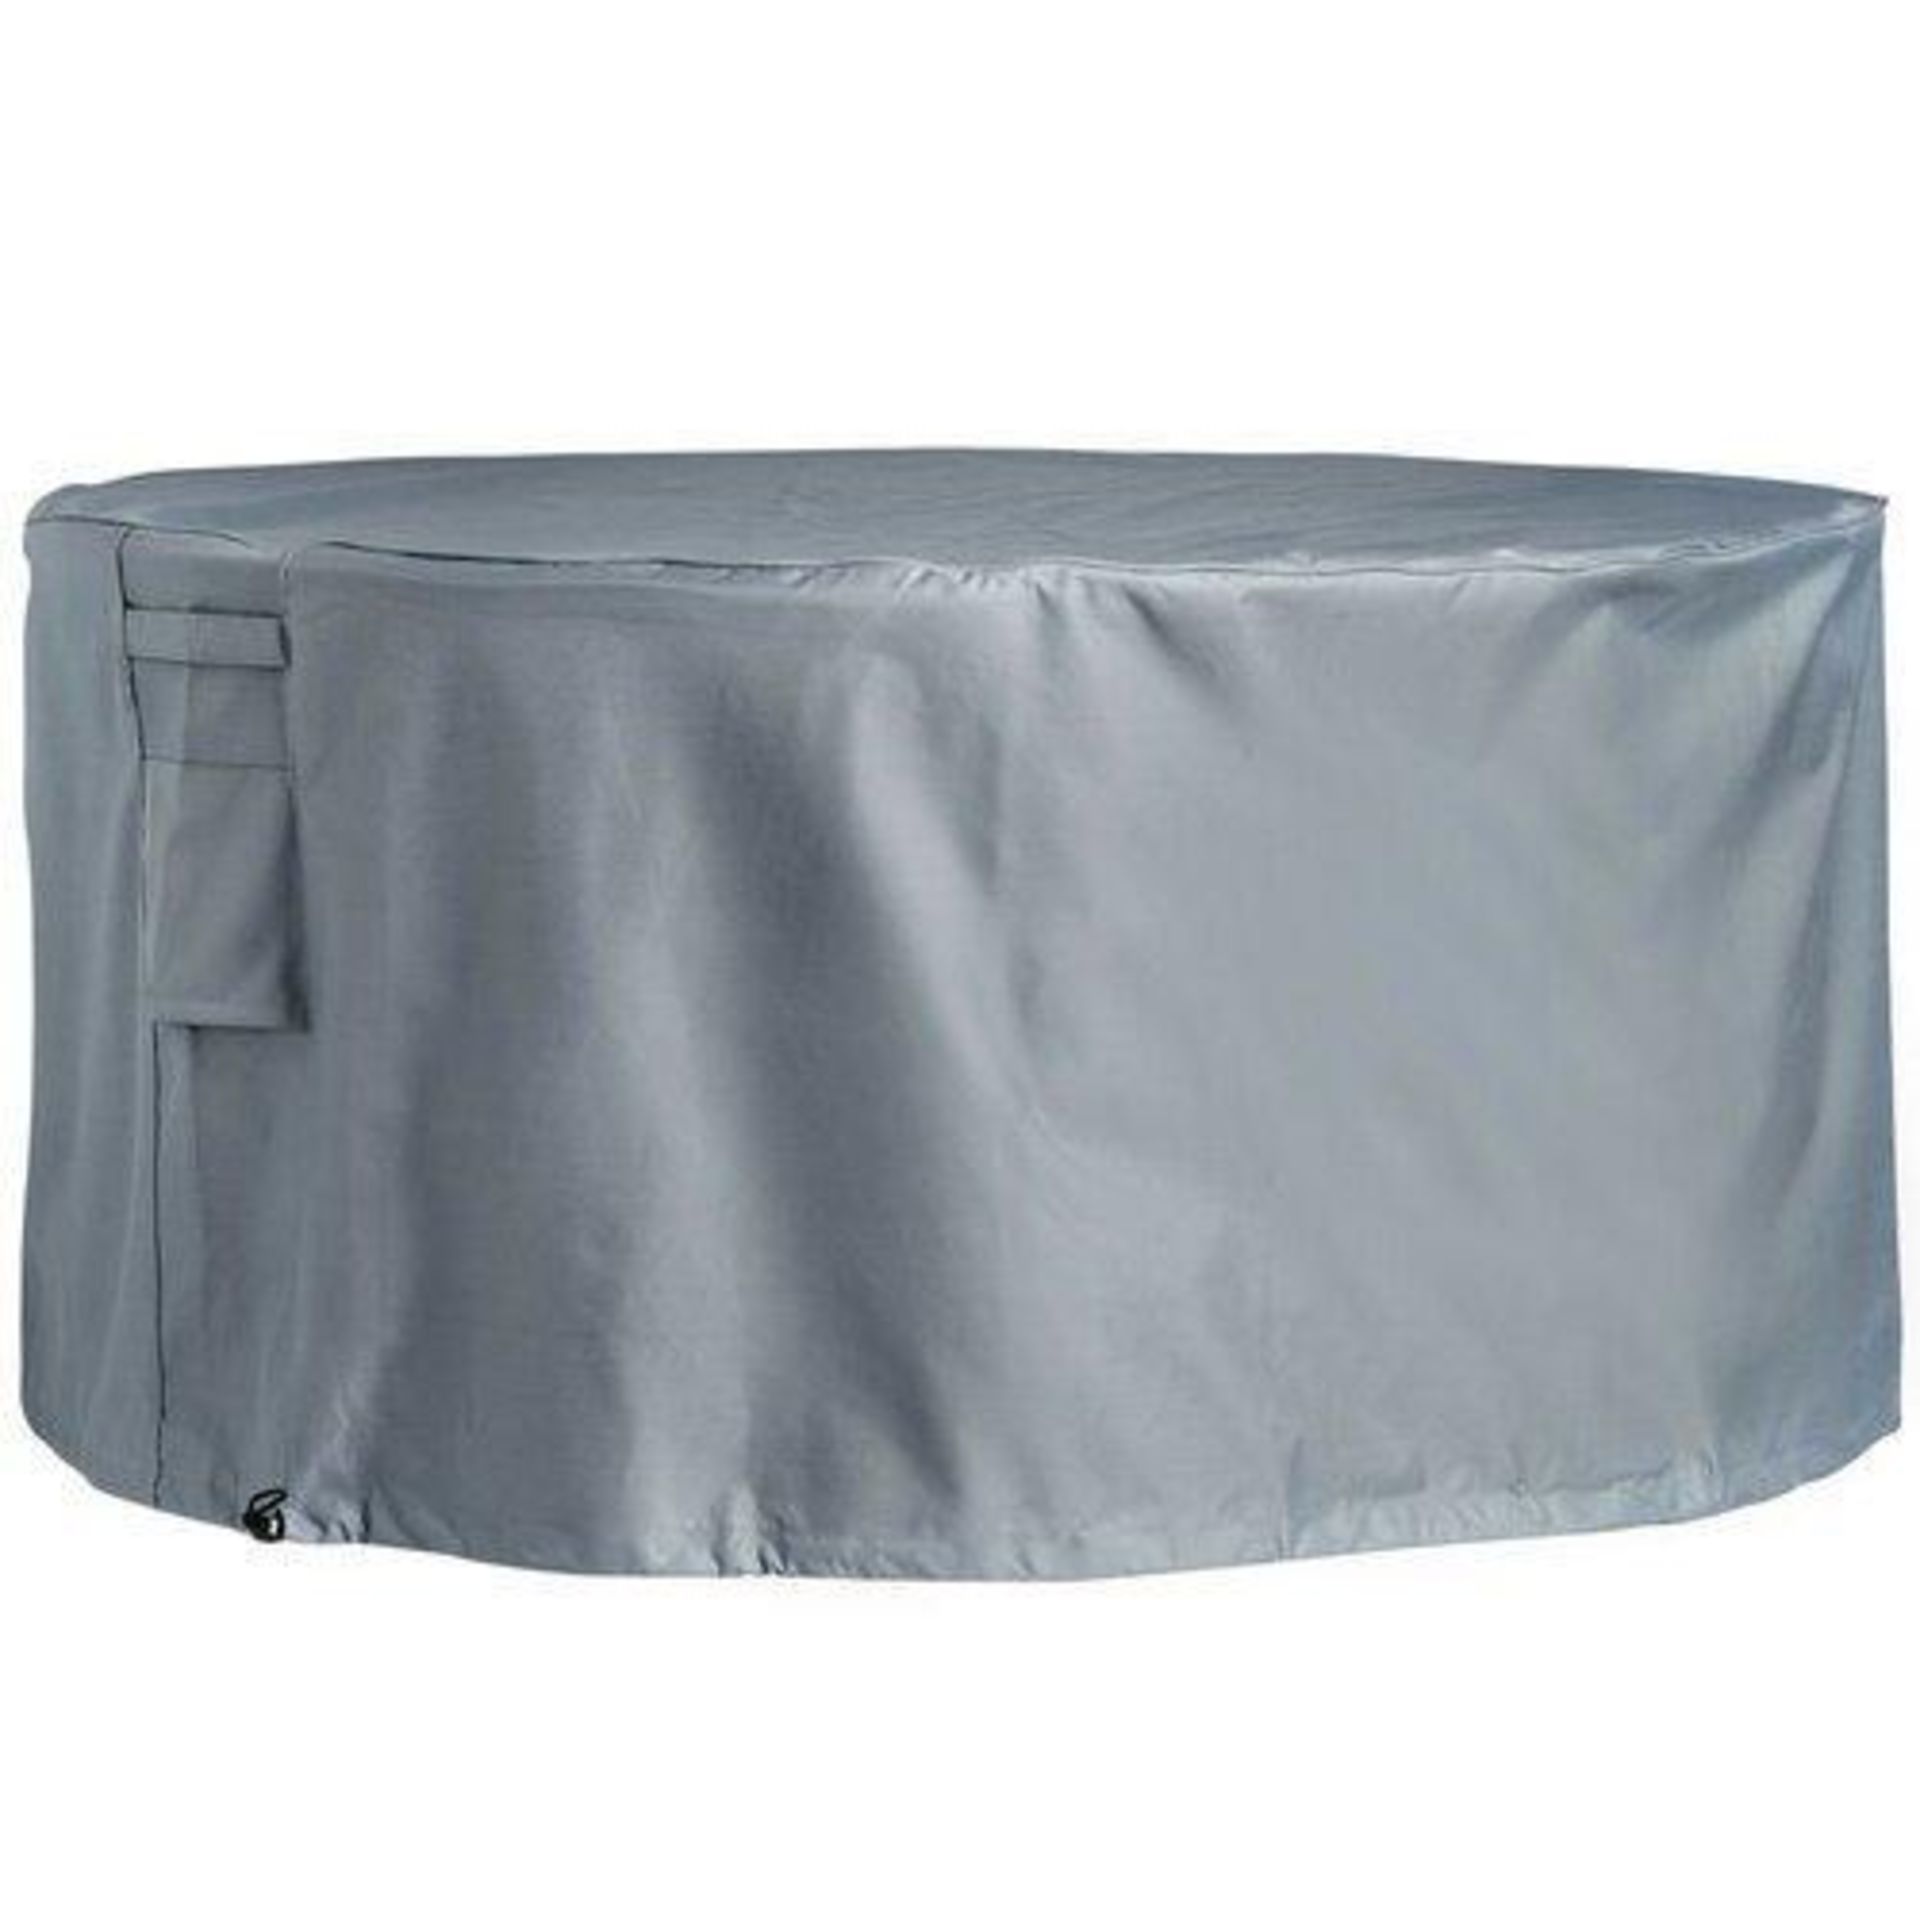 Medium Table Chairs Cover - ER50. Donâ€™t let the weather wreck your patio set - protect it with